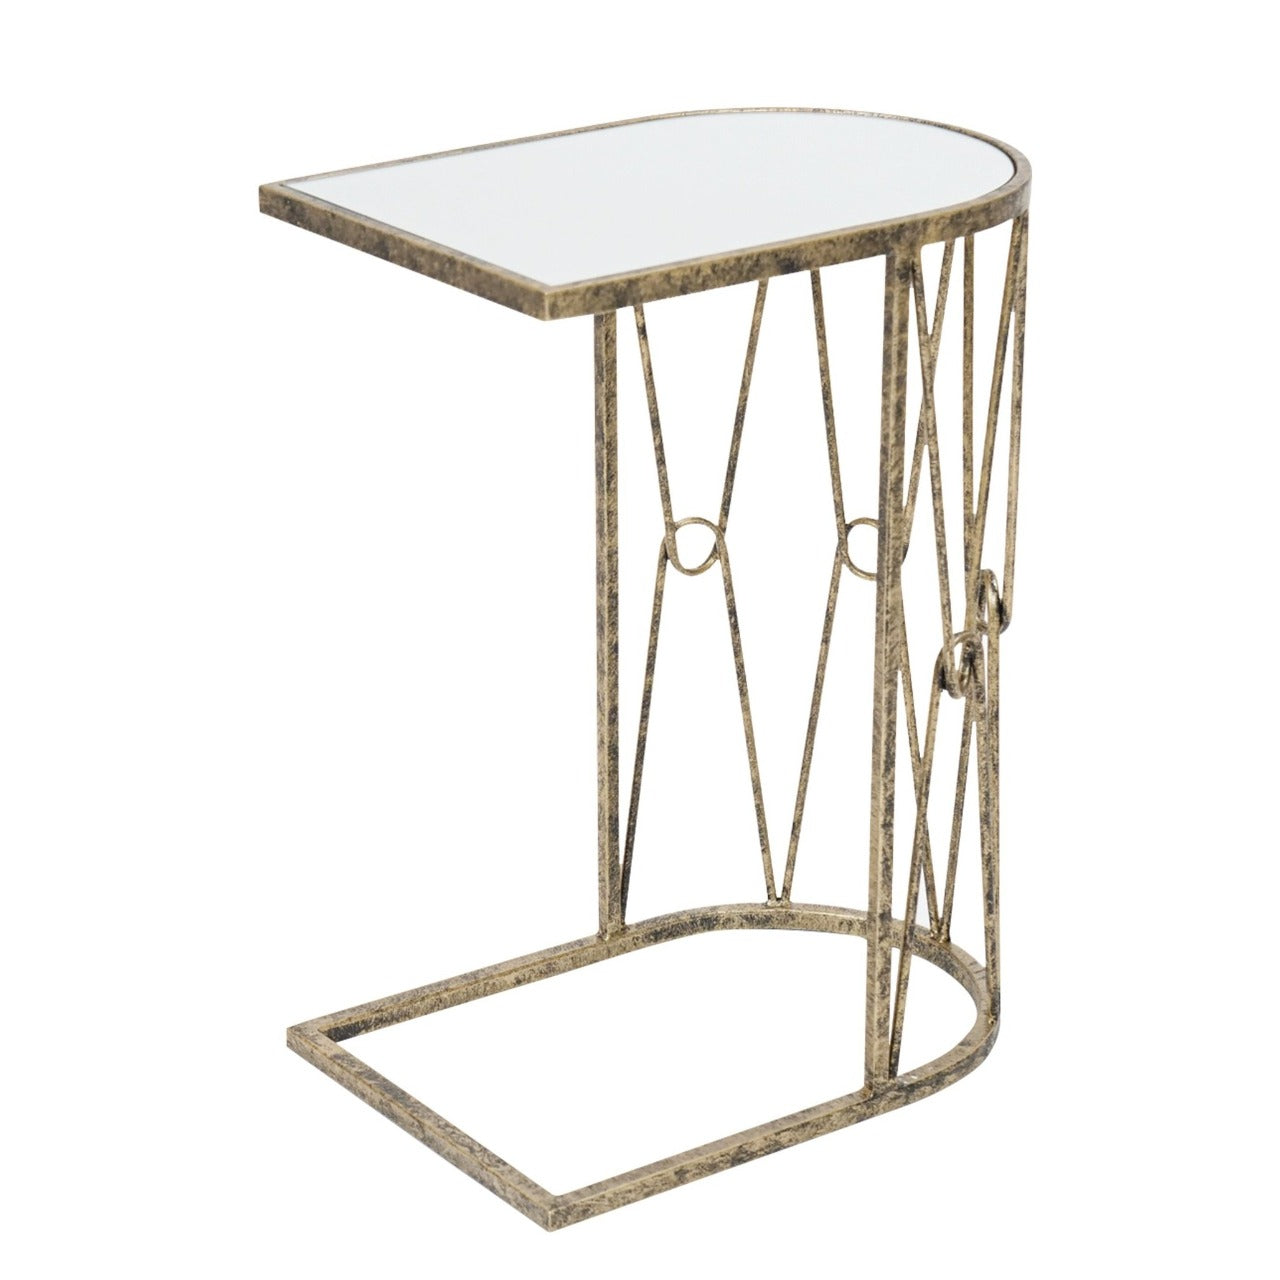 Mindy Brownes Wendover Side Table  A match of our set of two tables. Drum inspired design, this little drinks table slips easily under a sofa for ease and comfort! A cute sofa table finished in antique gold and a white marble top!